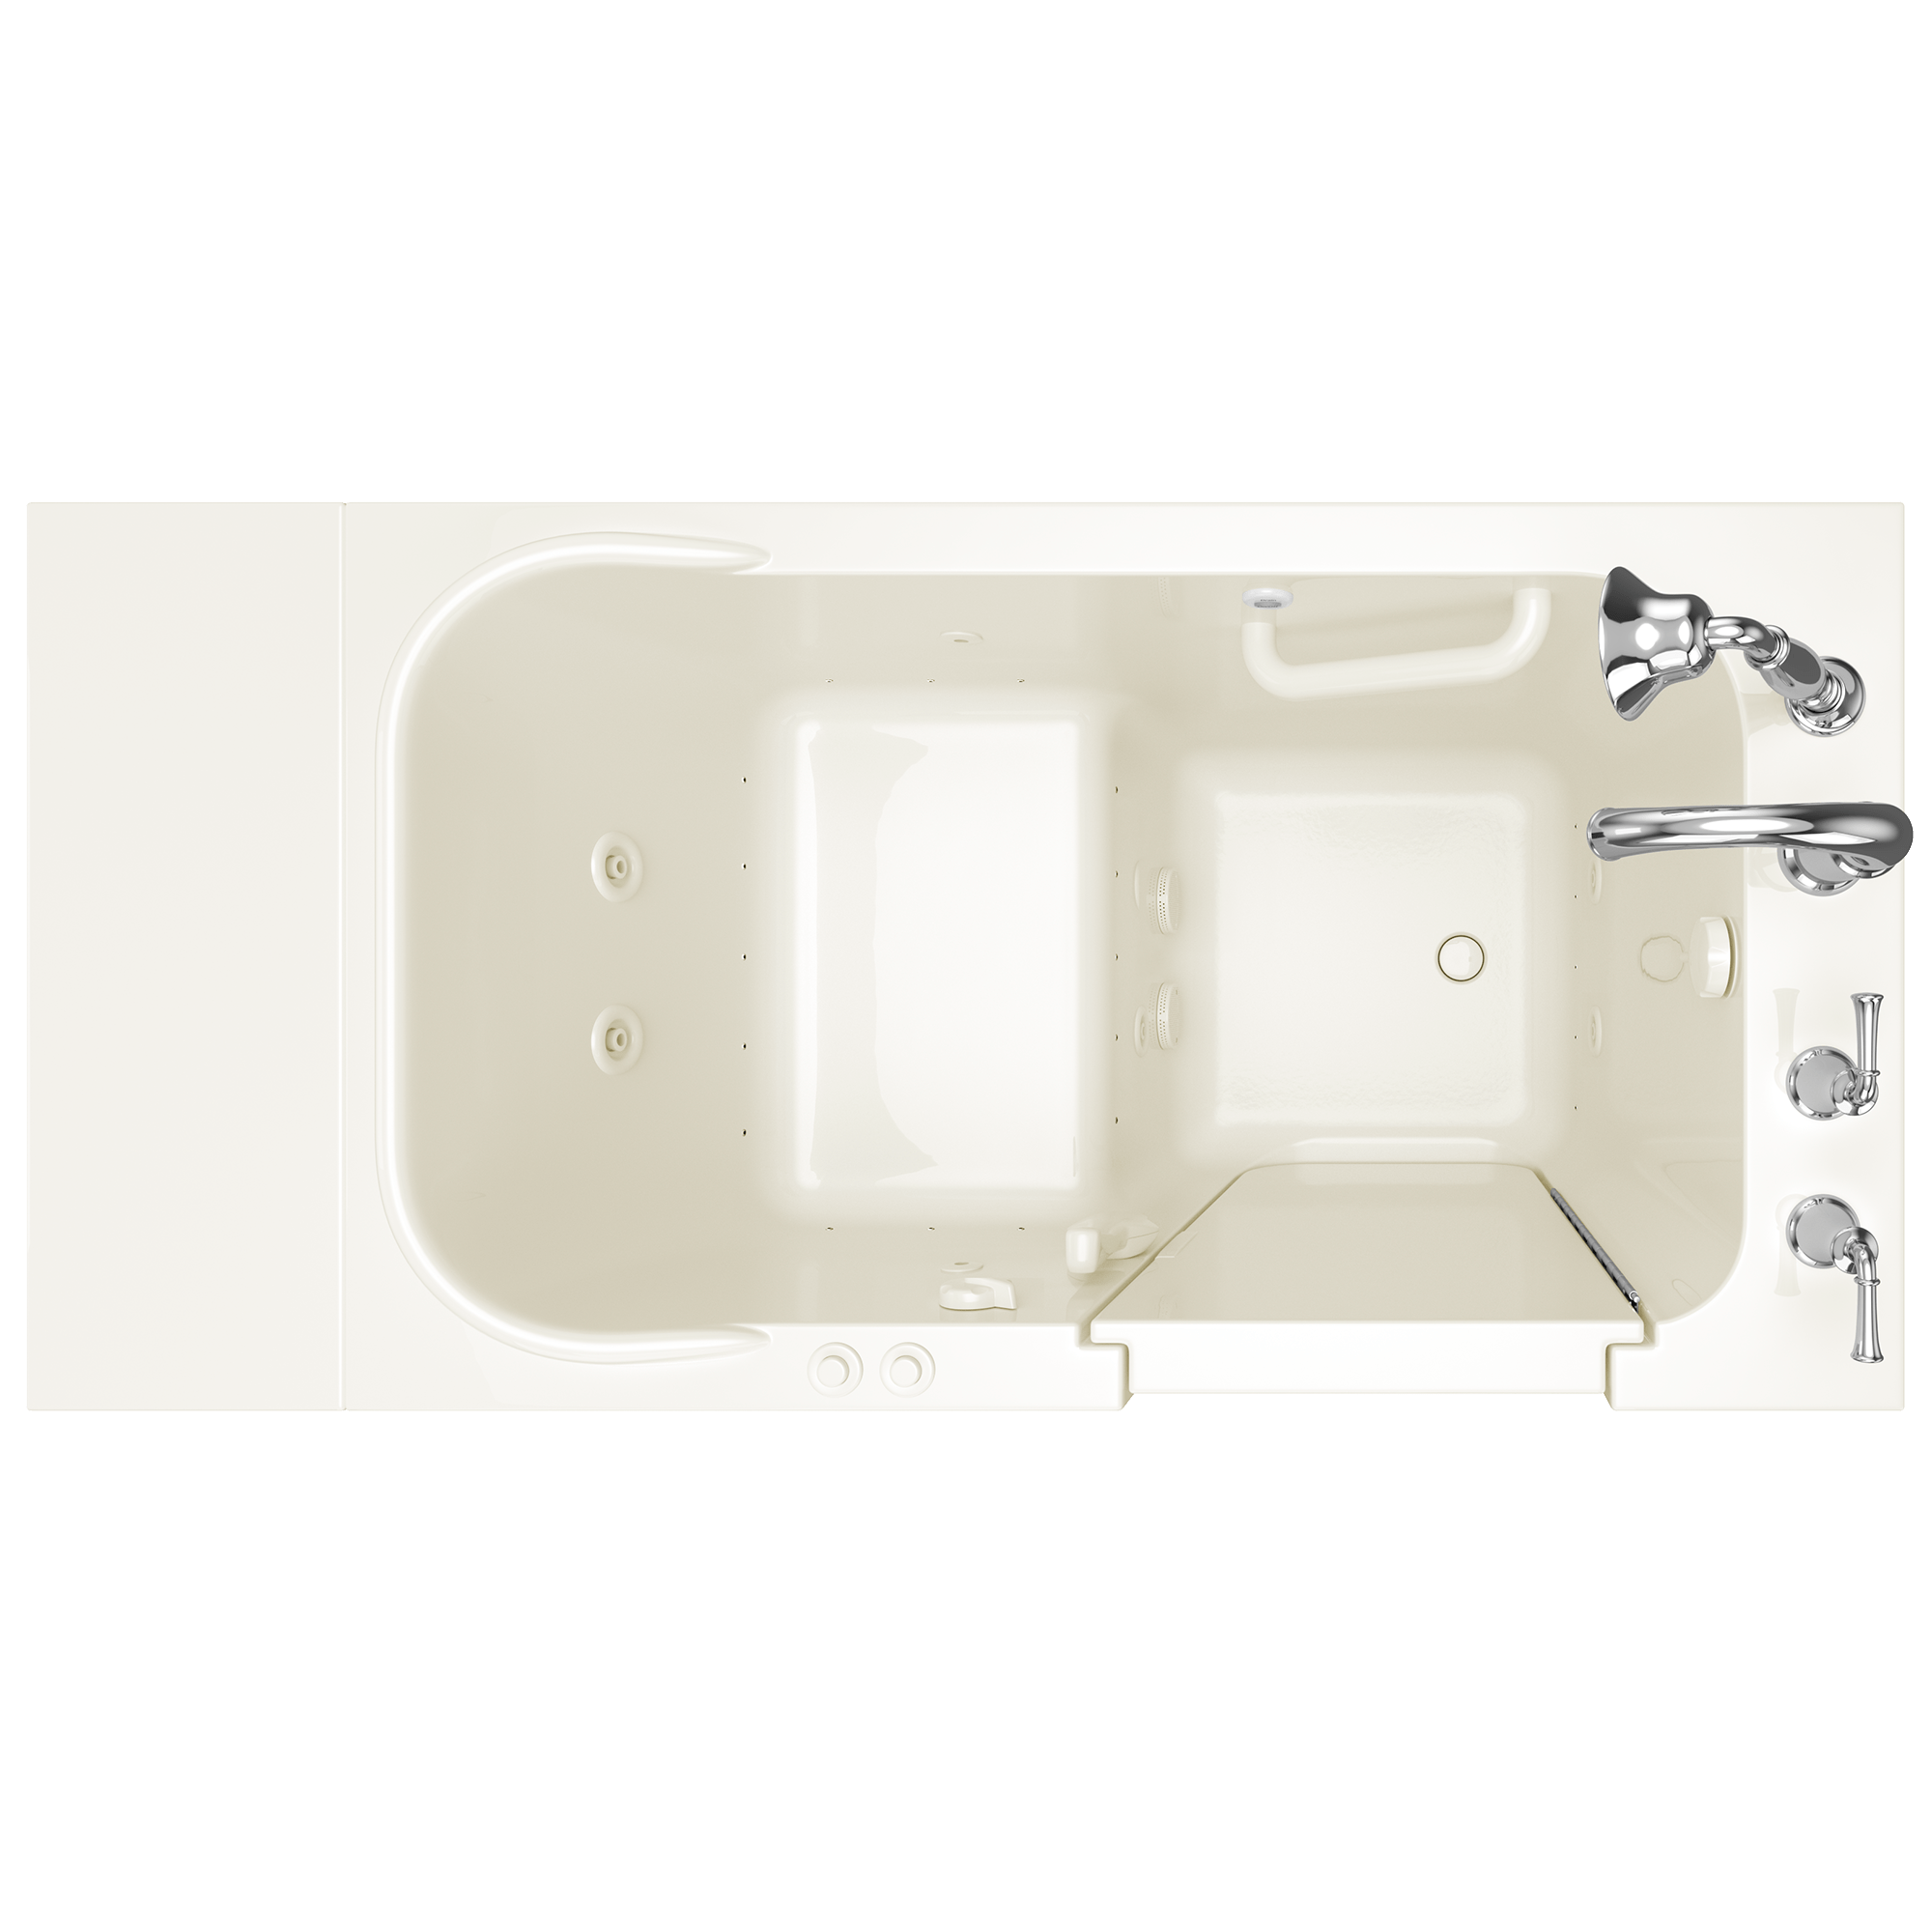 Gelcoat Value Series 28 x 48 Inch Walk in Tub With Combination Air Spa and Whirlpool Systems   Right Hand Drain With Faucet WIB LINEN